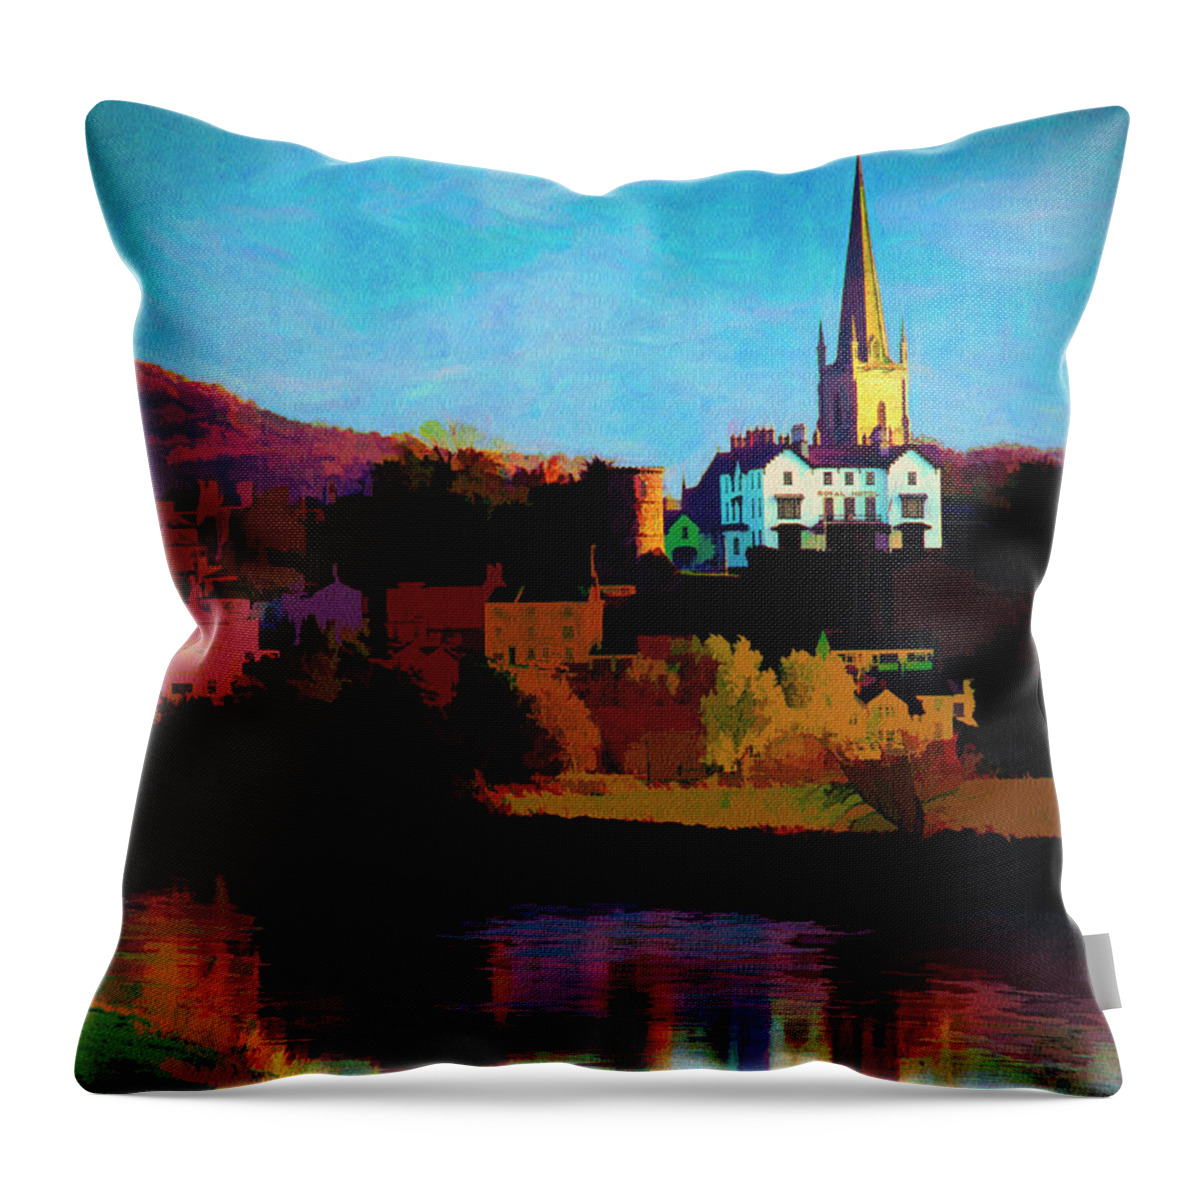 Nag862152m Throw Pillow featuring the digital art Ross on Wye by Edmund Nagele FRPS